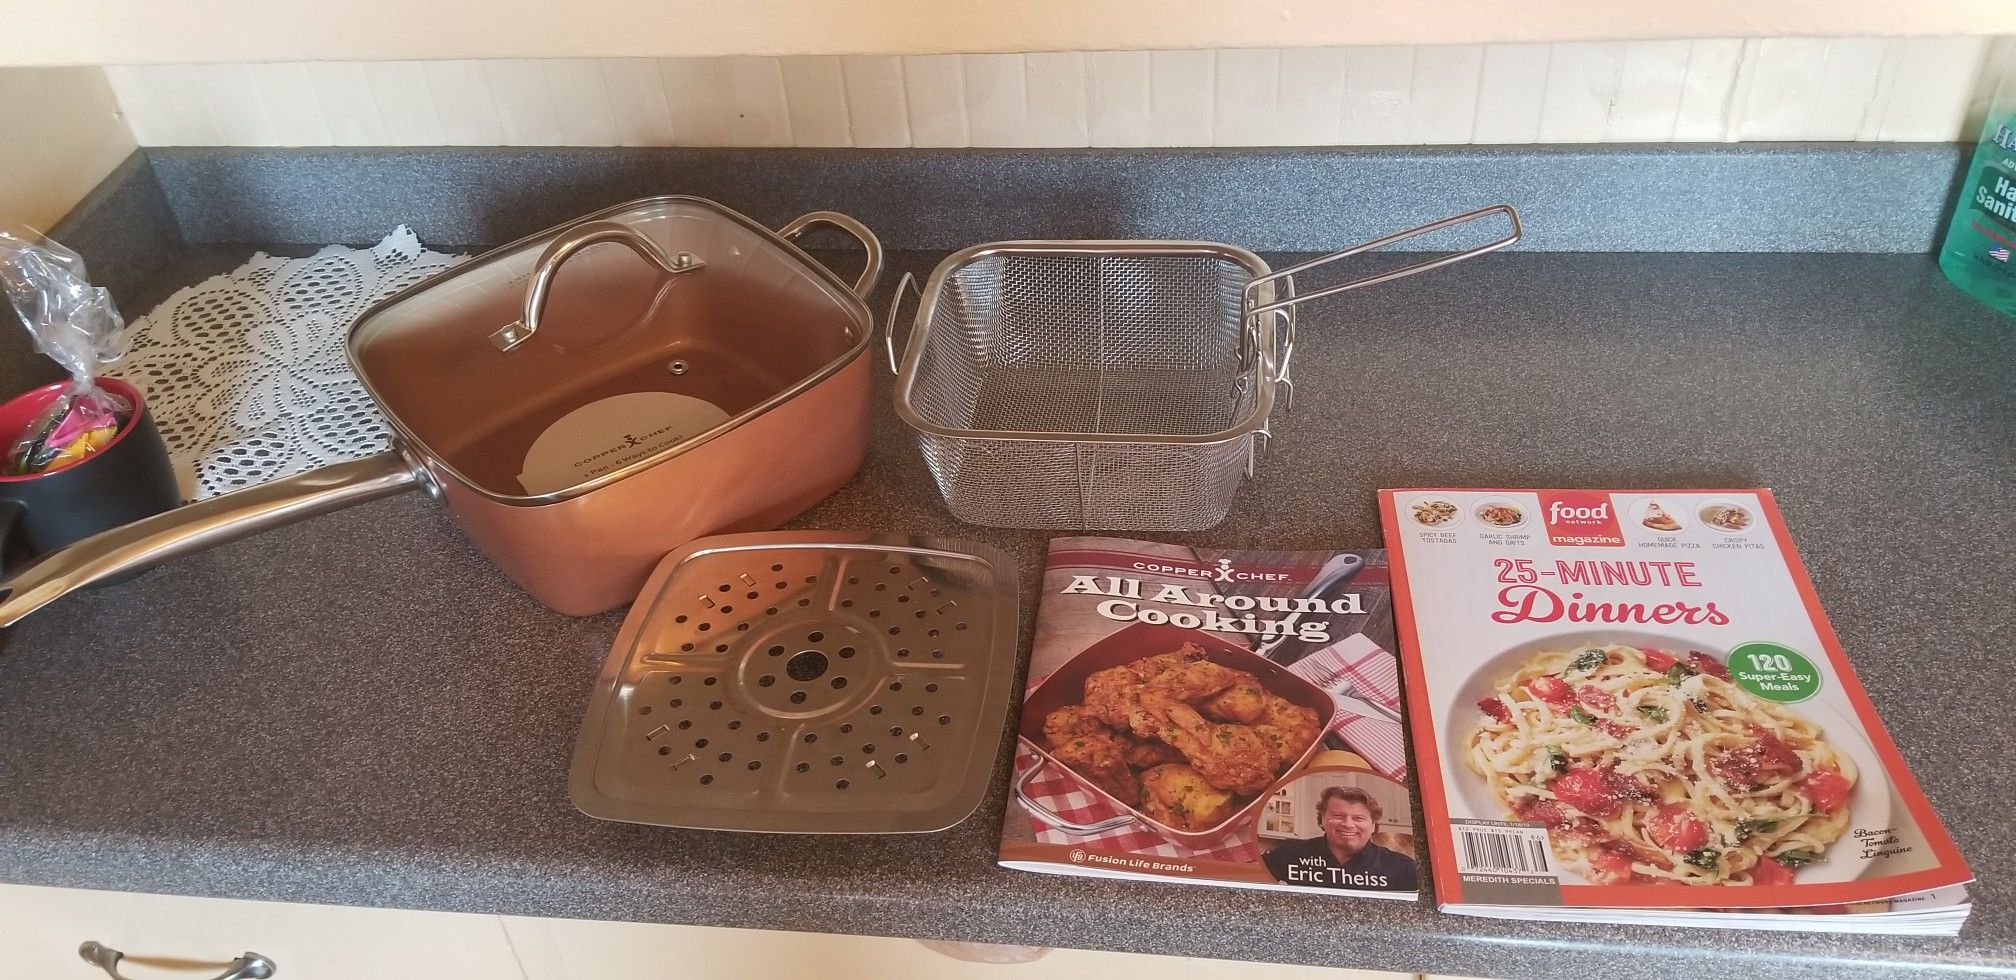 Copper Chef 5pc Square Fry Pan with Glass Lid - 9.5" w/ Bonus cook book